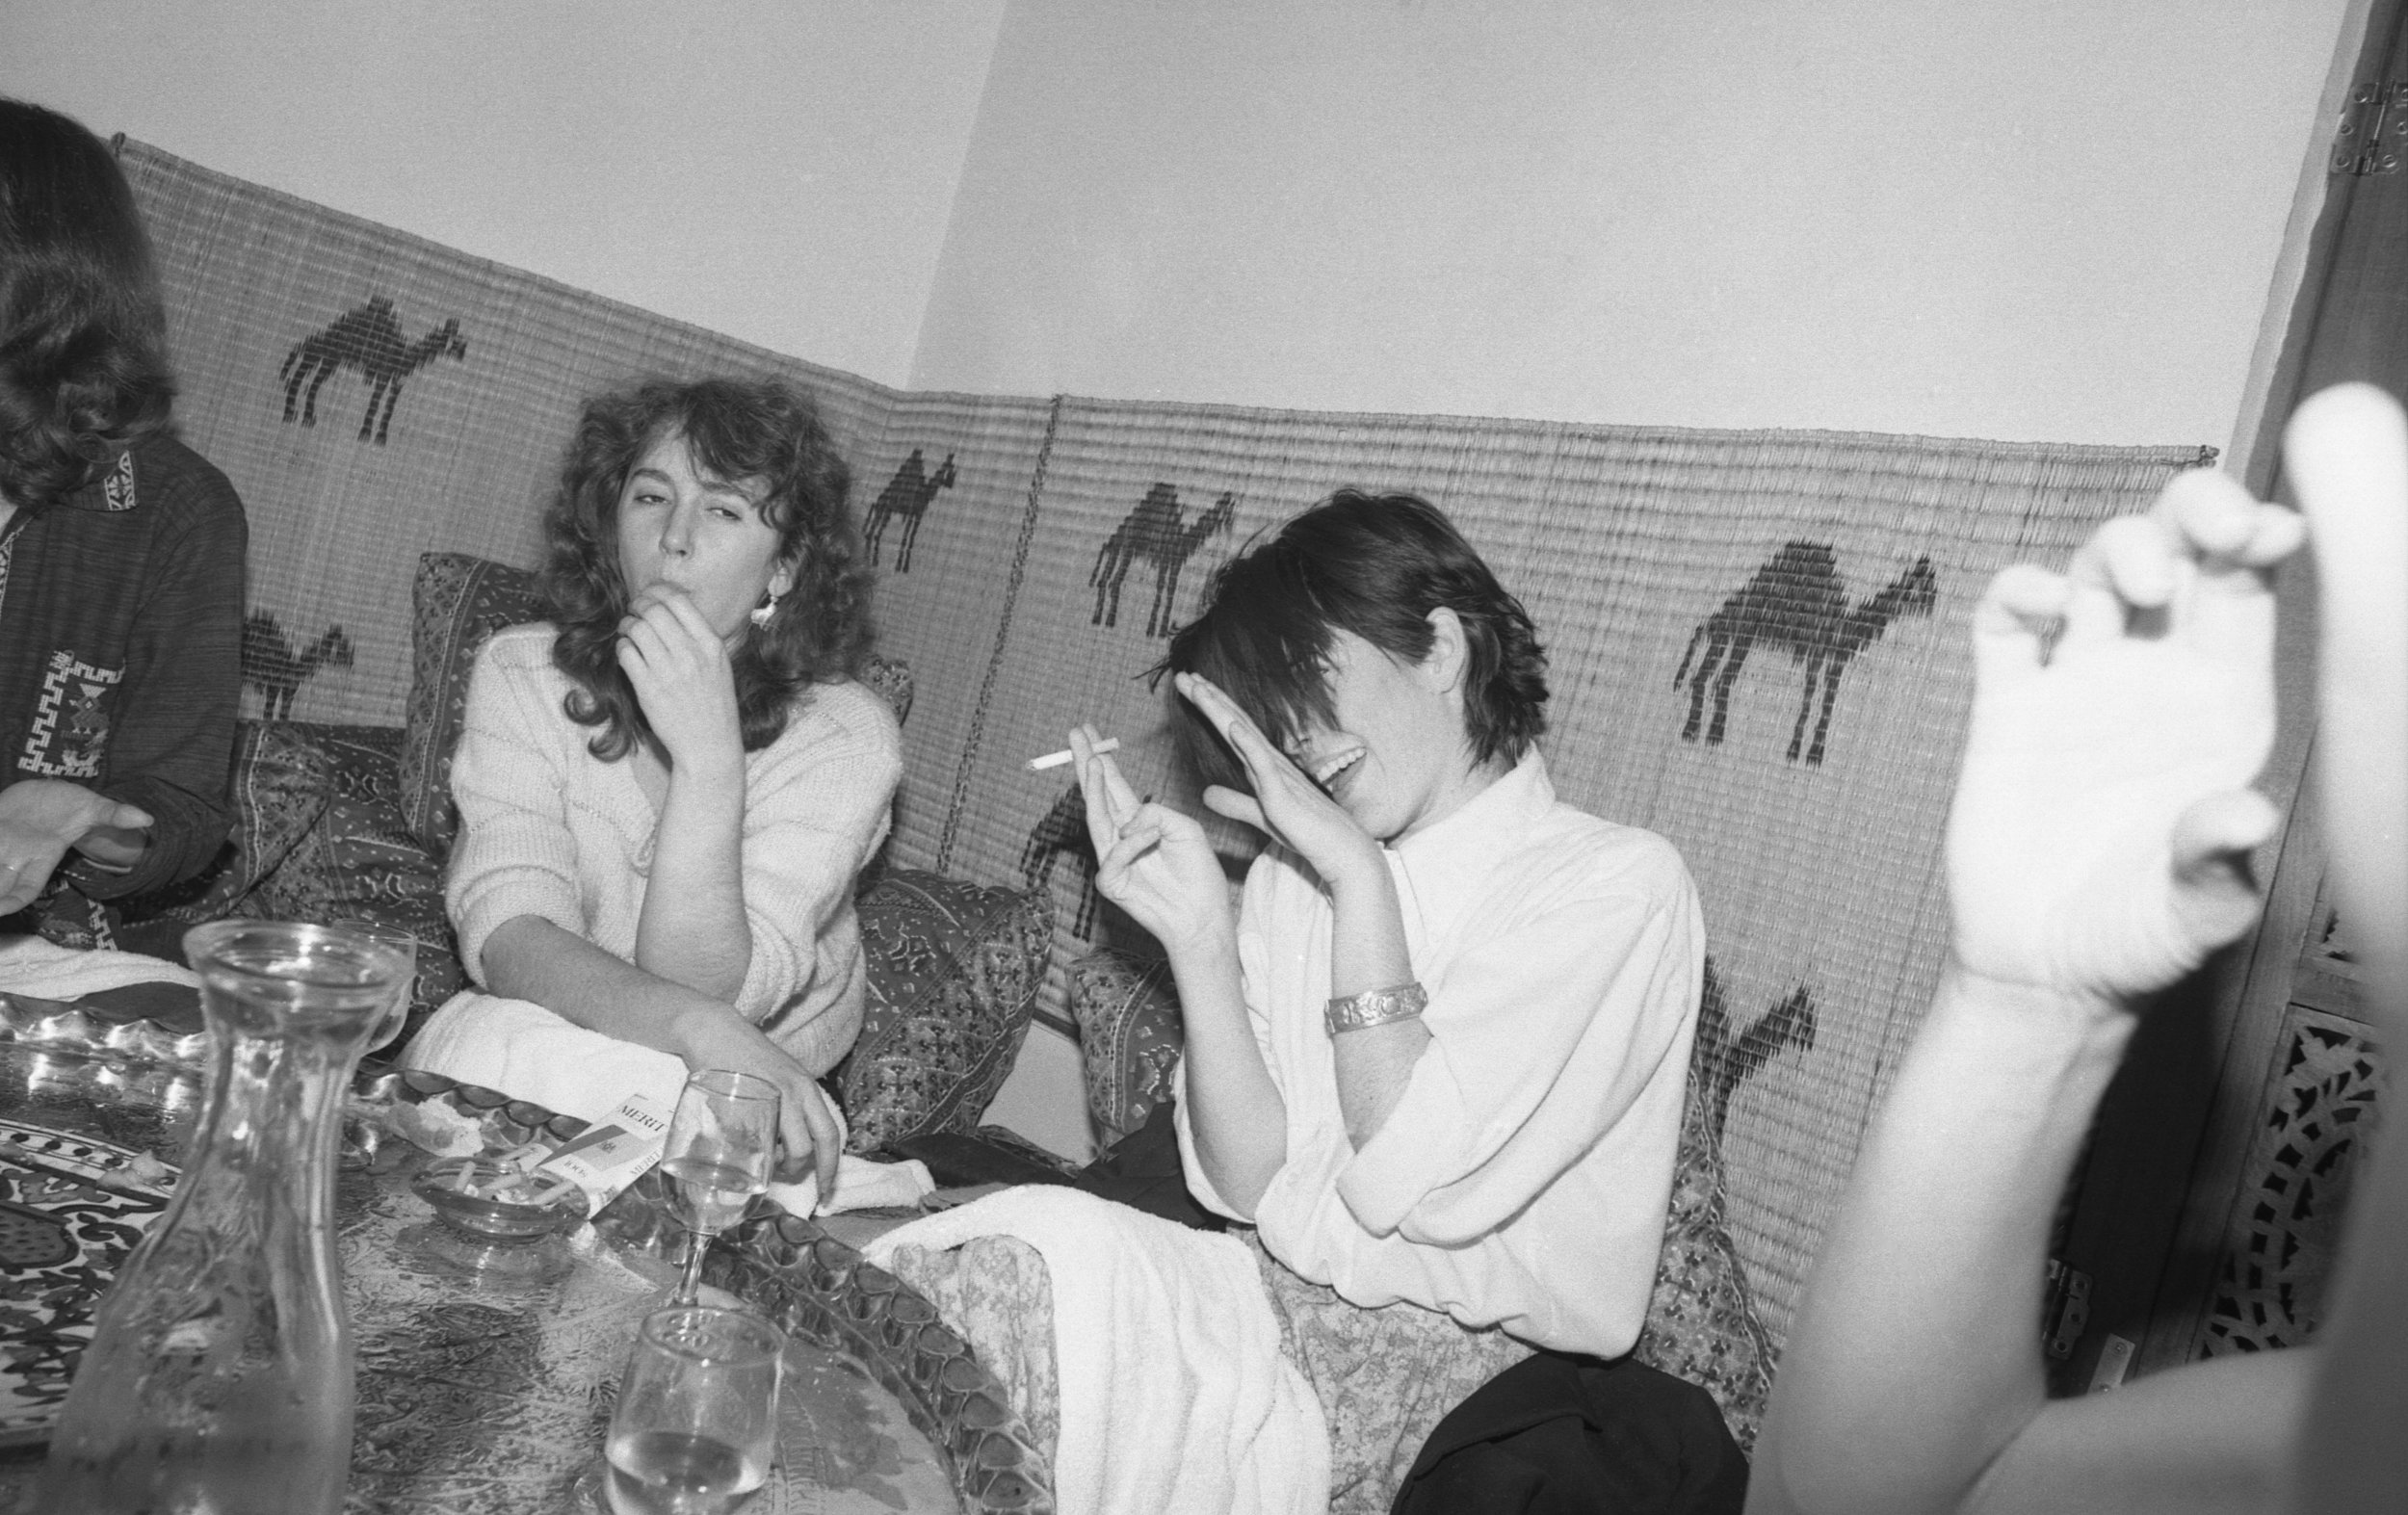 Moroccan Restaurant: Girls' Night Out. Los Angeles, 1981 (3/19)